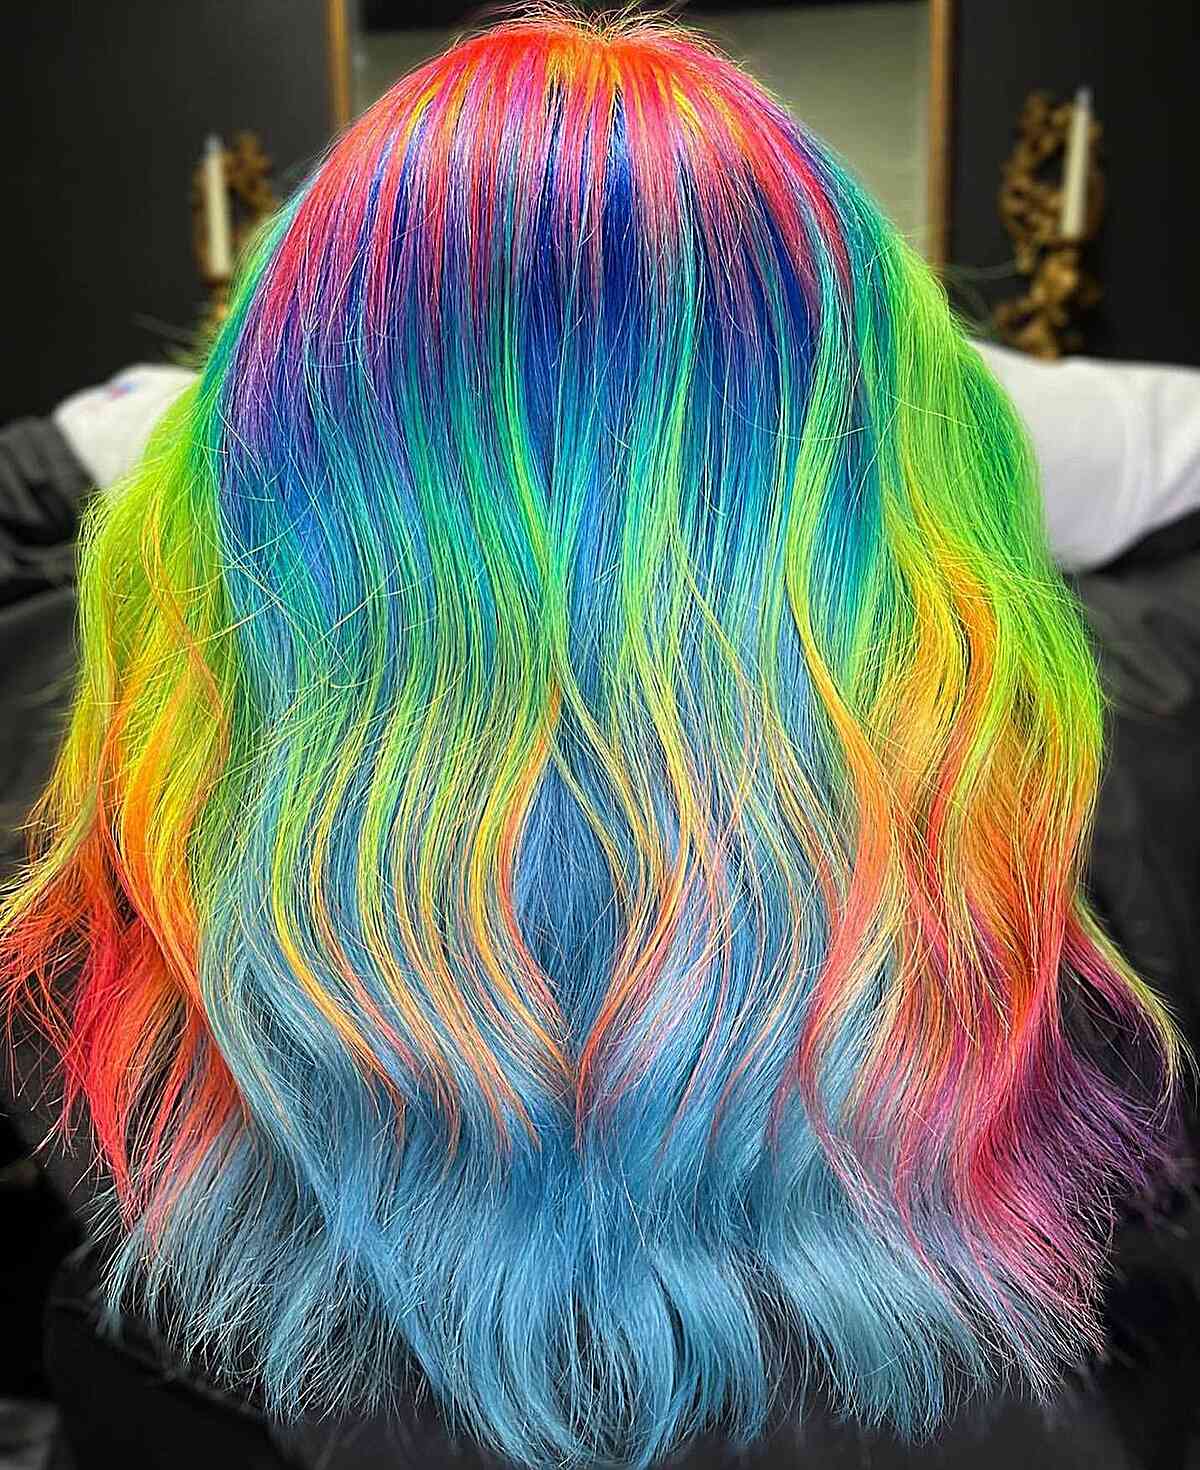 Try Glow in the Dark Hair Dye for a Fun Color Change - L'Oréal Paris